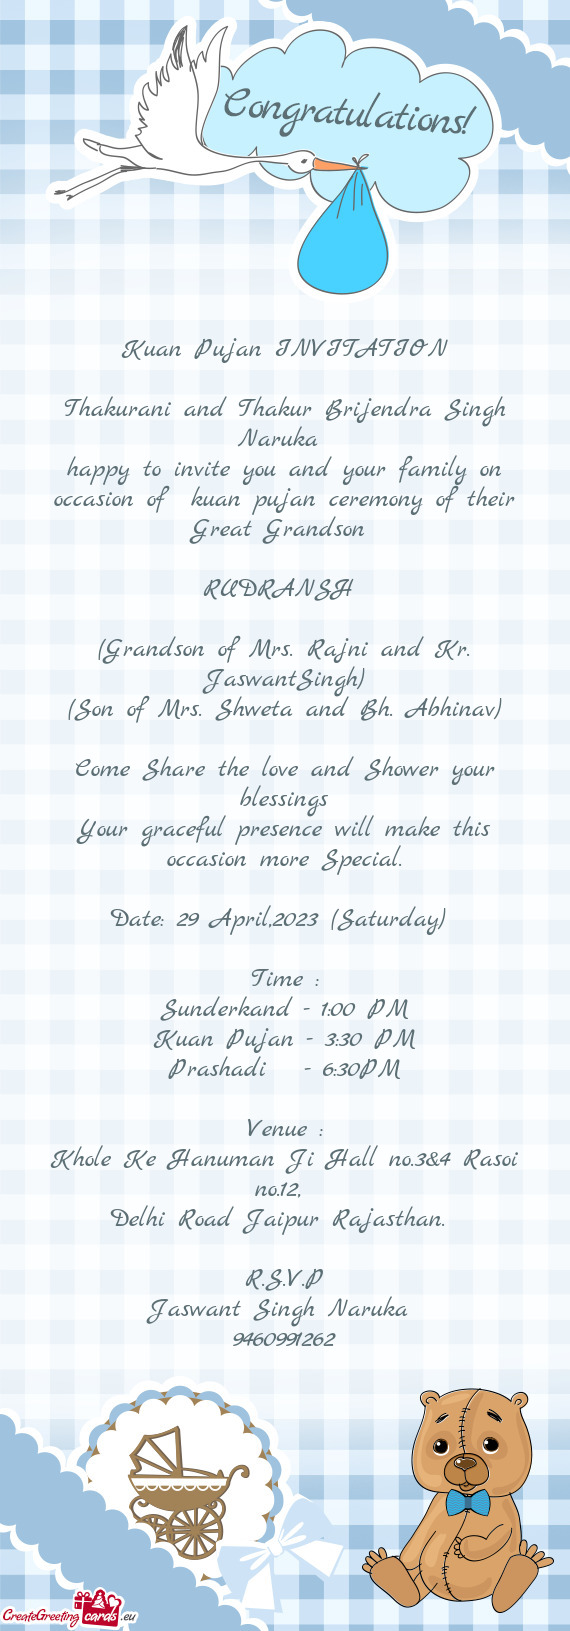 Happy to invite you and your family on occasion of kuan pujan ceremony of their Great Grandson